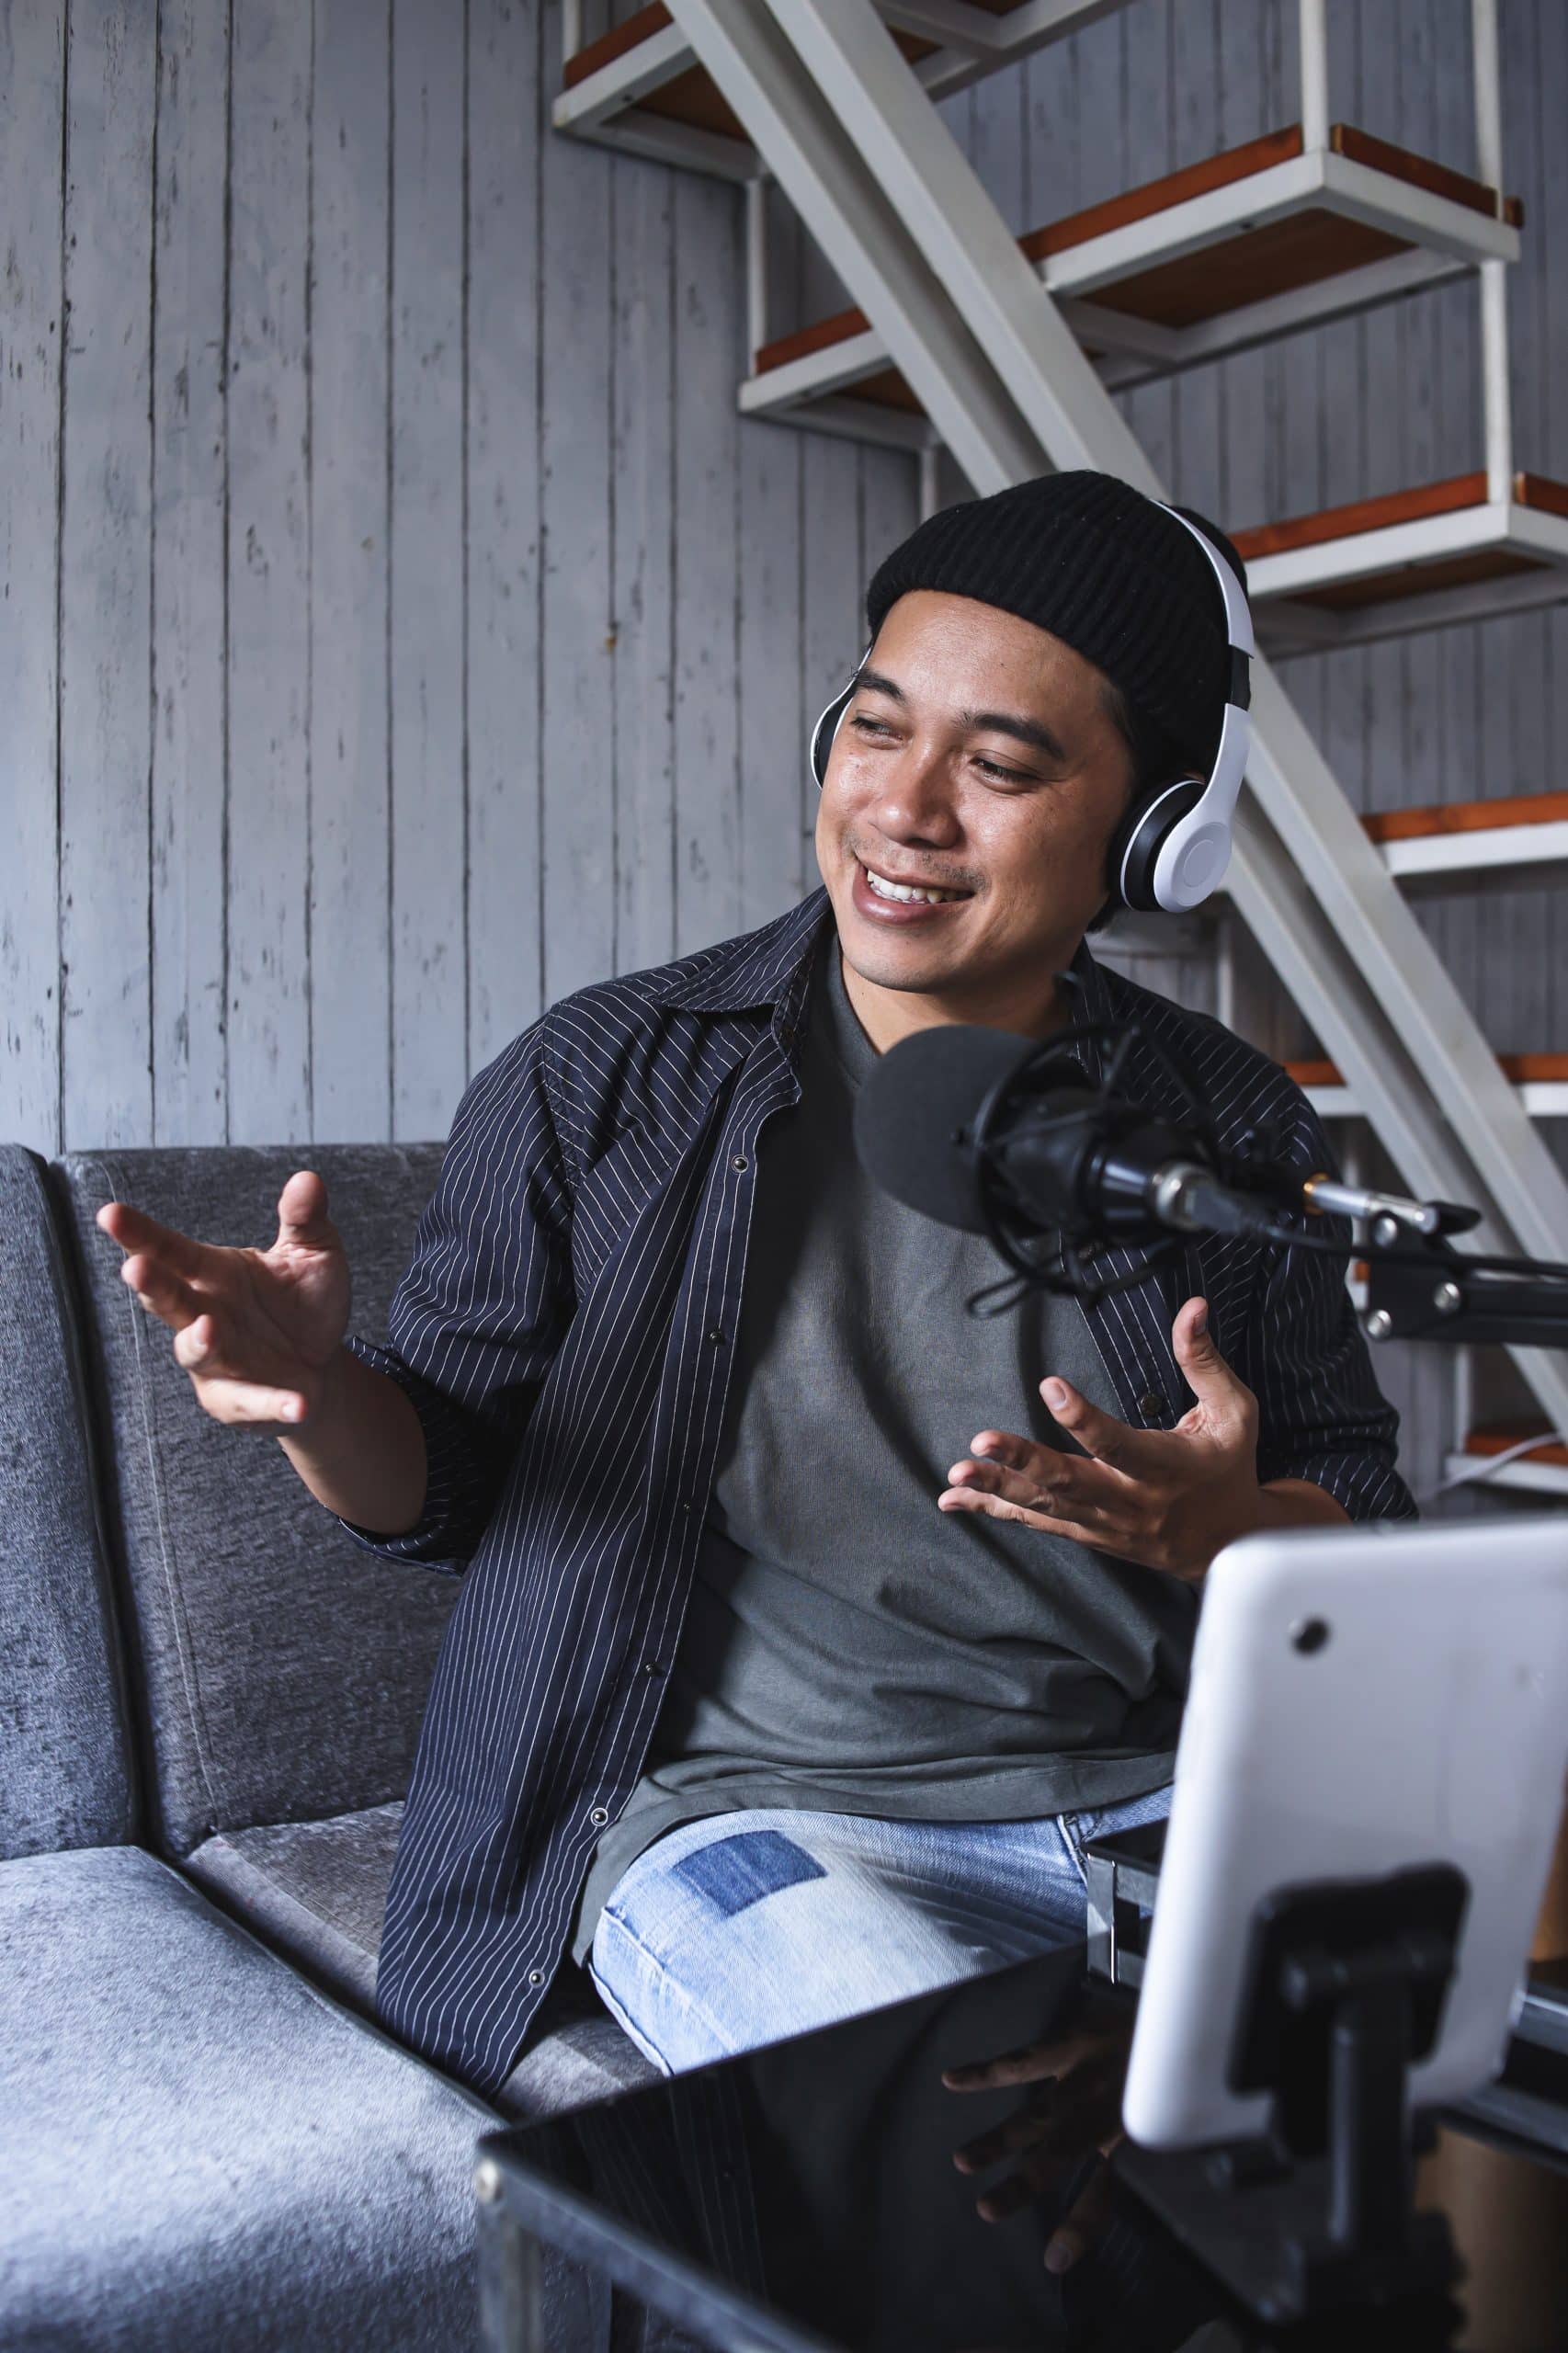 An Asian man is hosting a podcast. He is wearing a black beanie cap, black striped shirt, and white headphones.